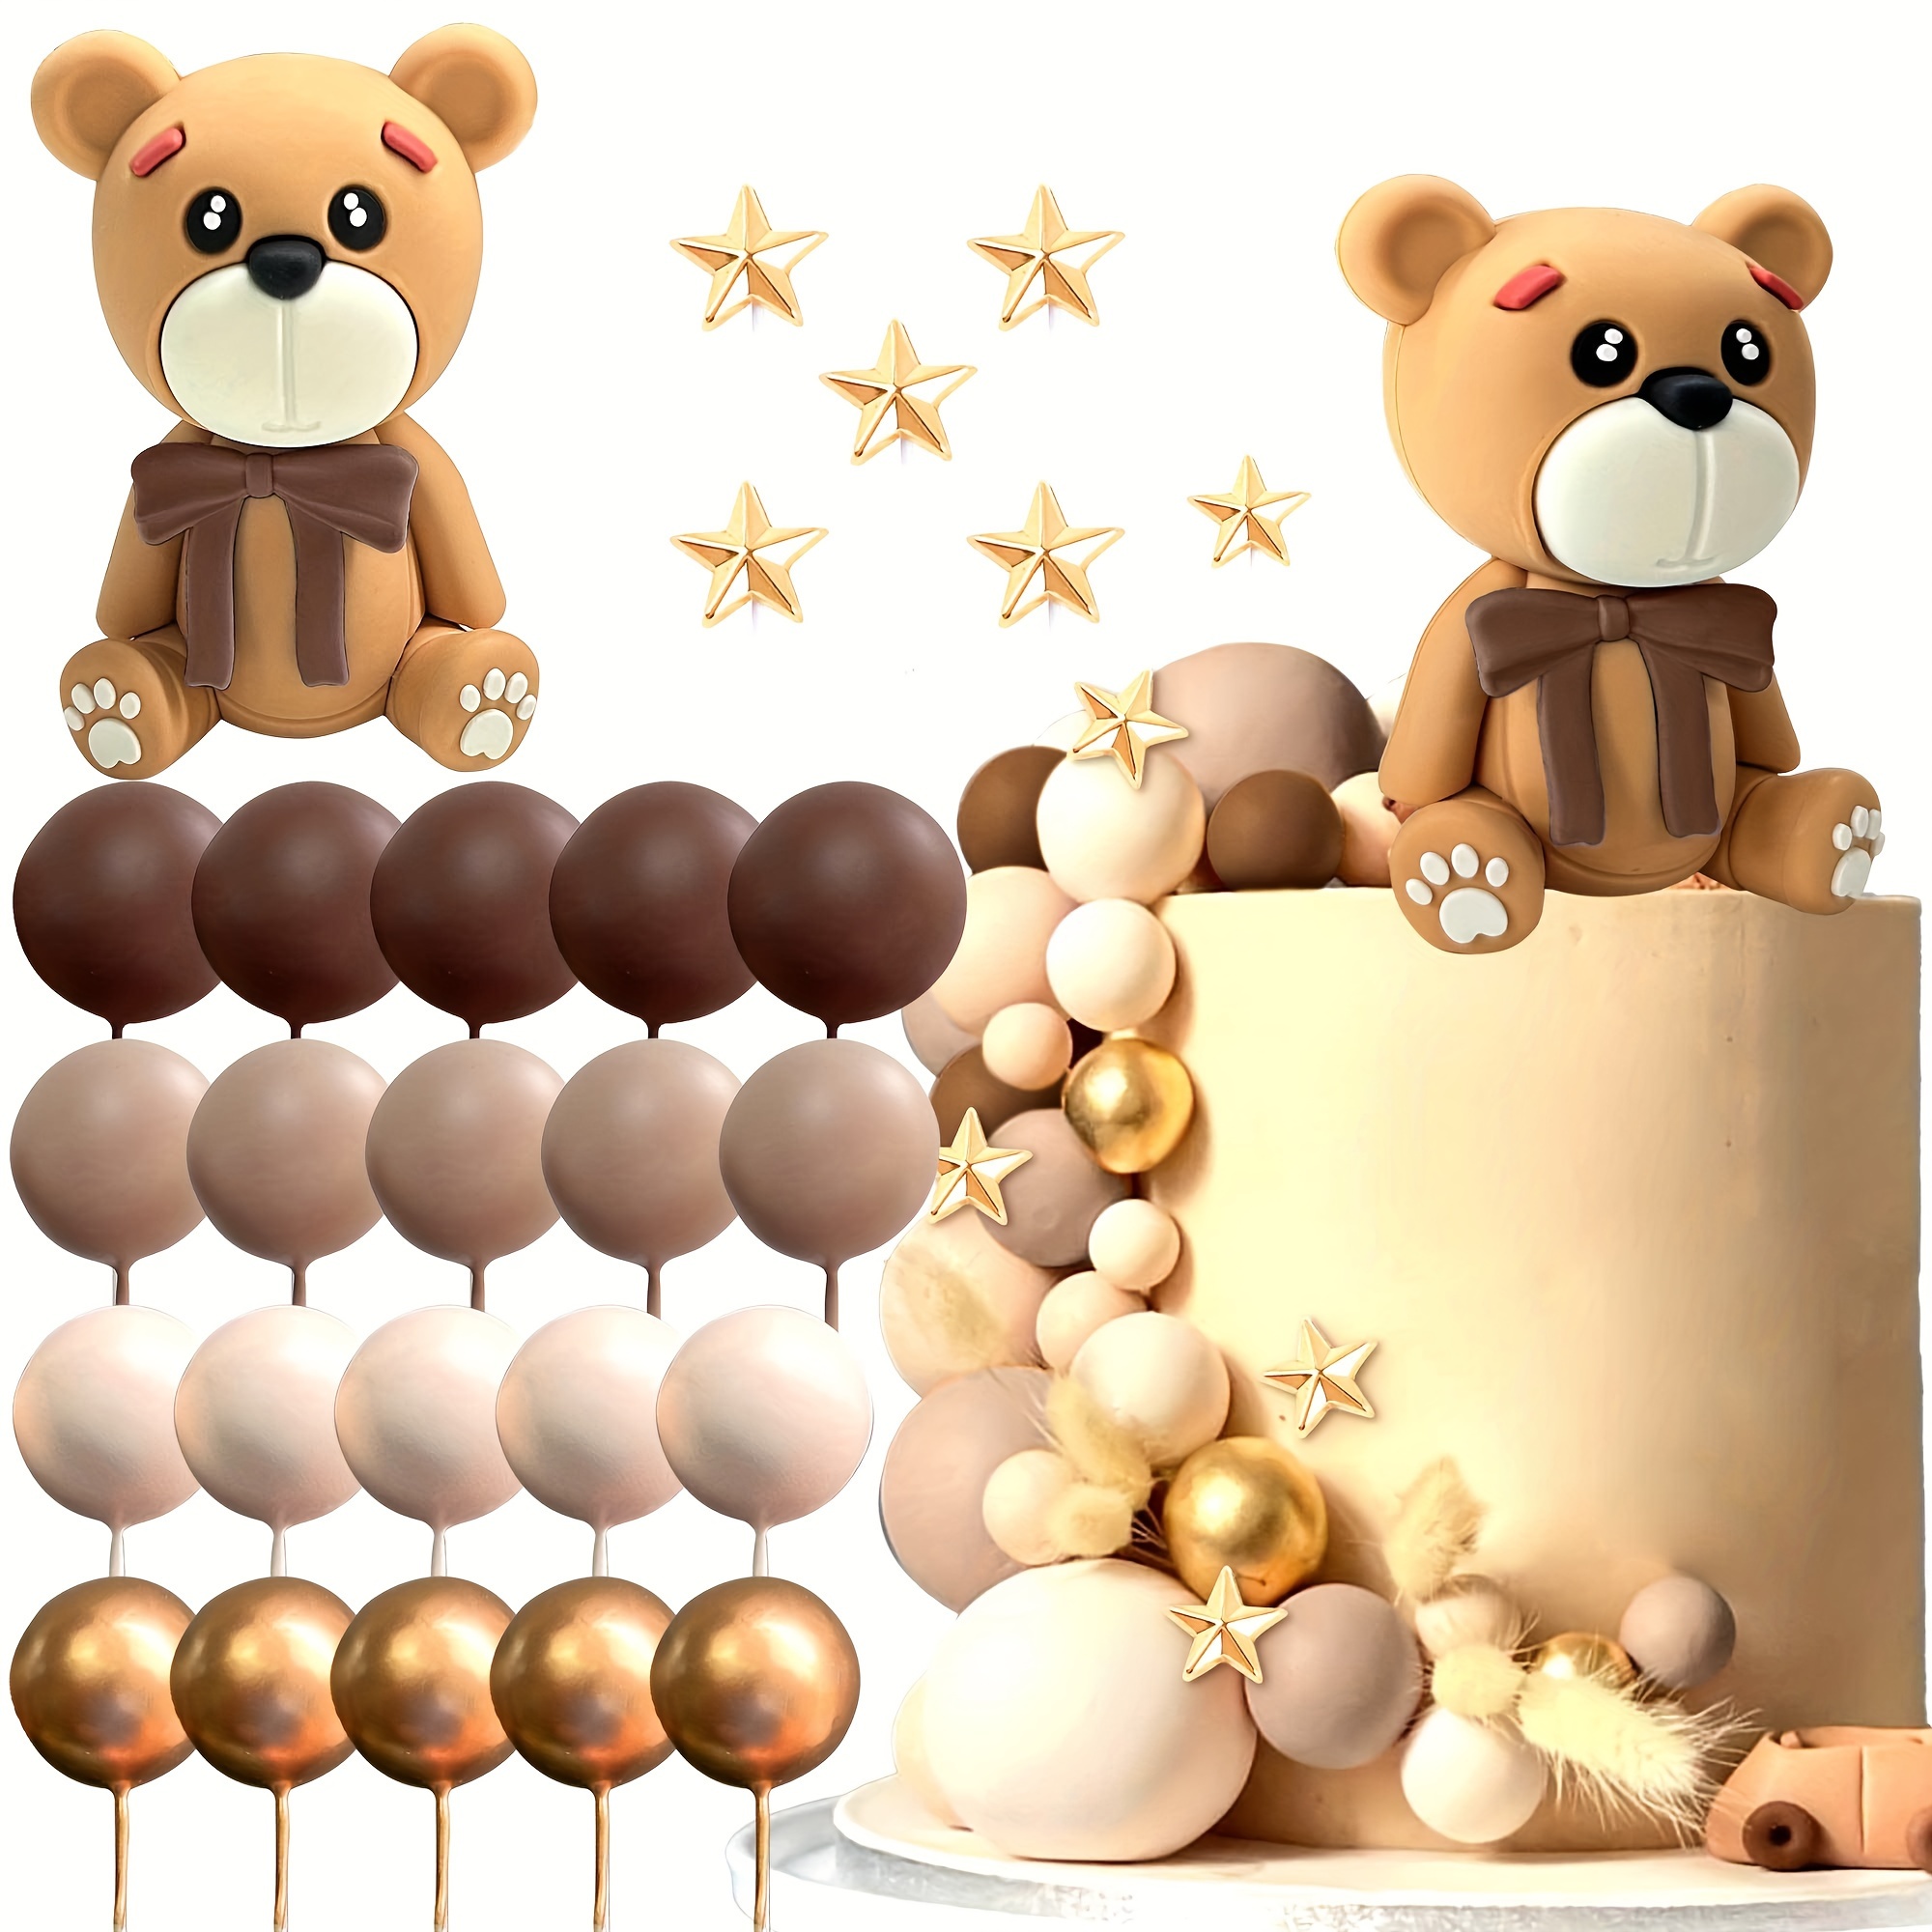 

Personalized Teddy Bear Cake Topper Set - Multicolor Bowknot Design For Weddings, Birthdays & Themed Parties - Includes Golden & Brown Balloons